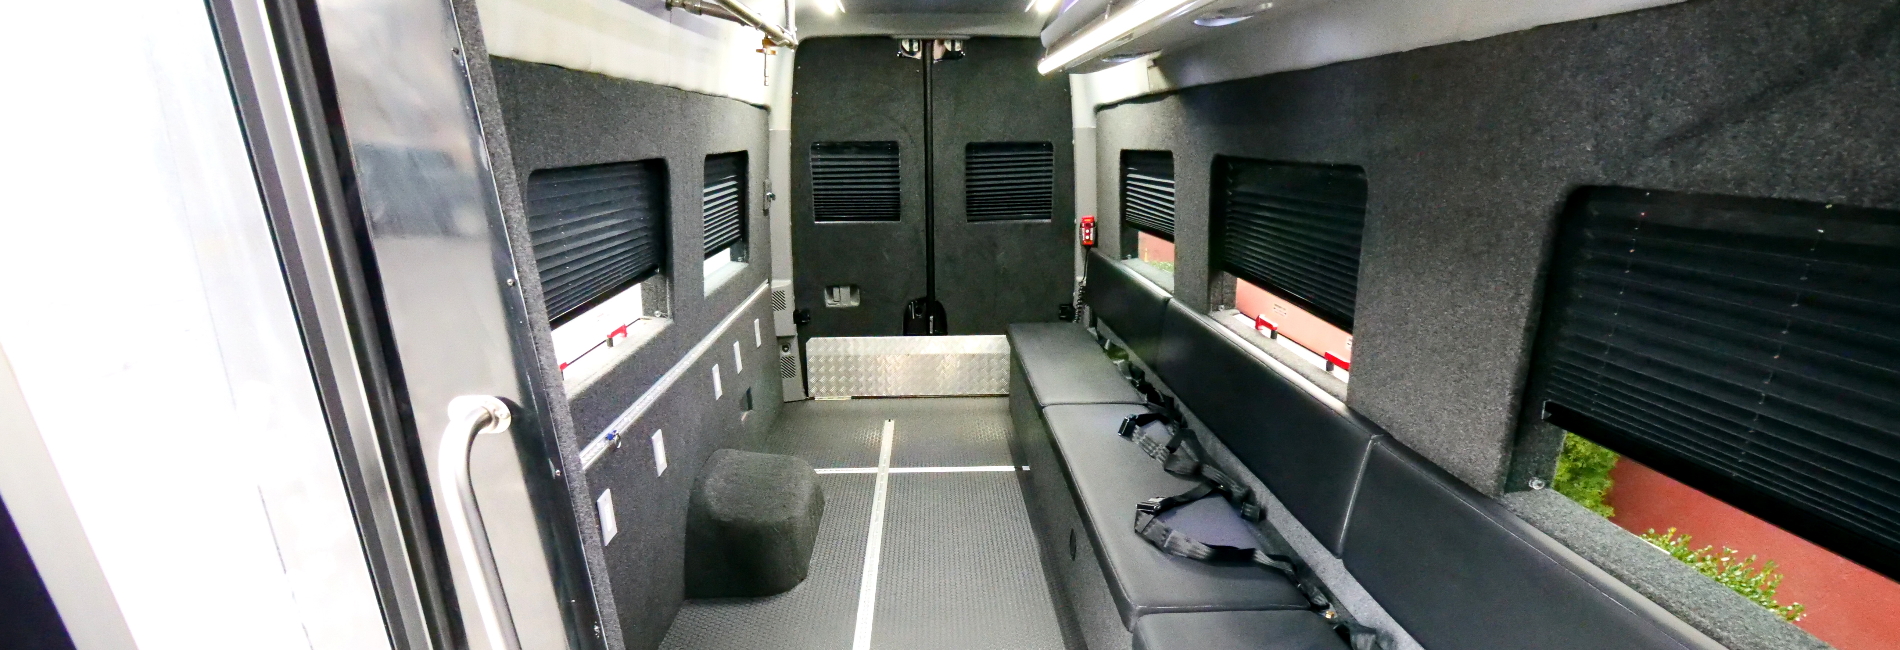 Mobile movie production chase van with film crew bench seating, hanging monitor brackets, rear lift, and storage for equipment.